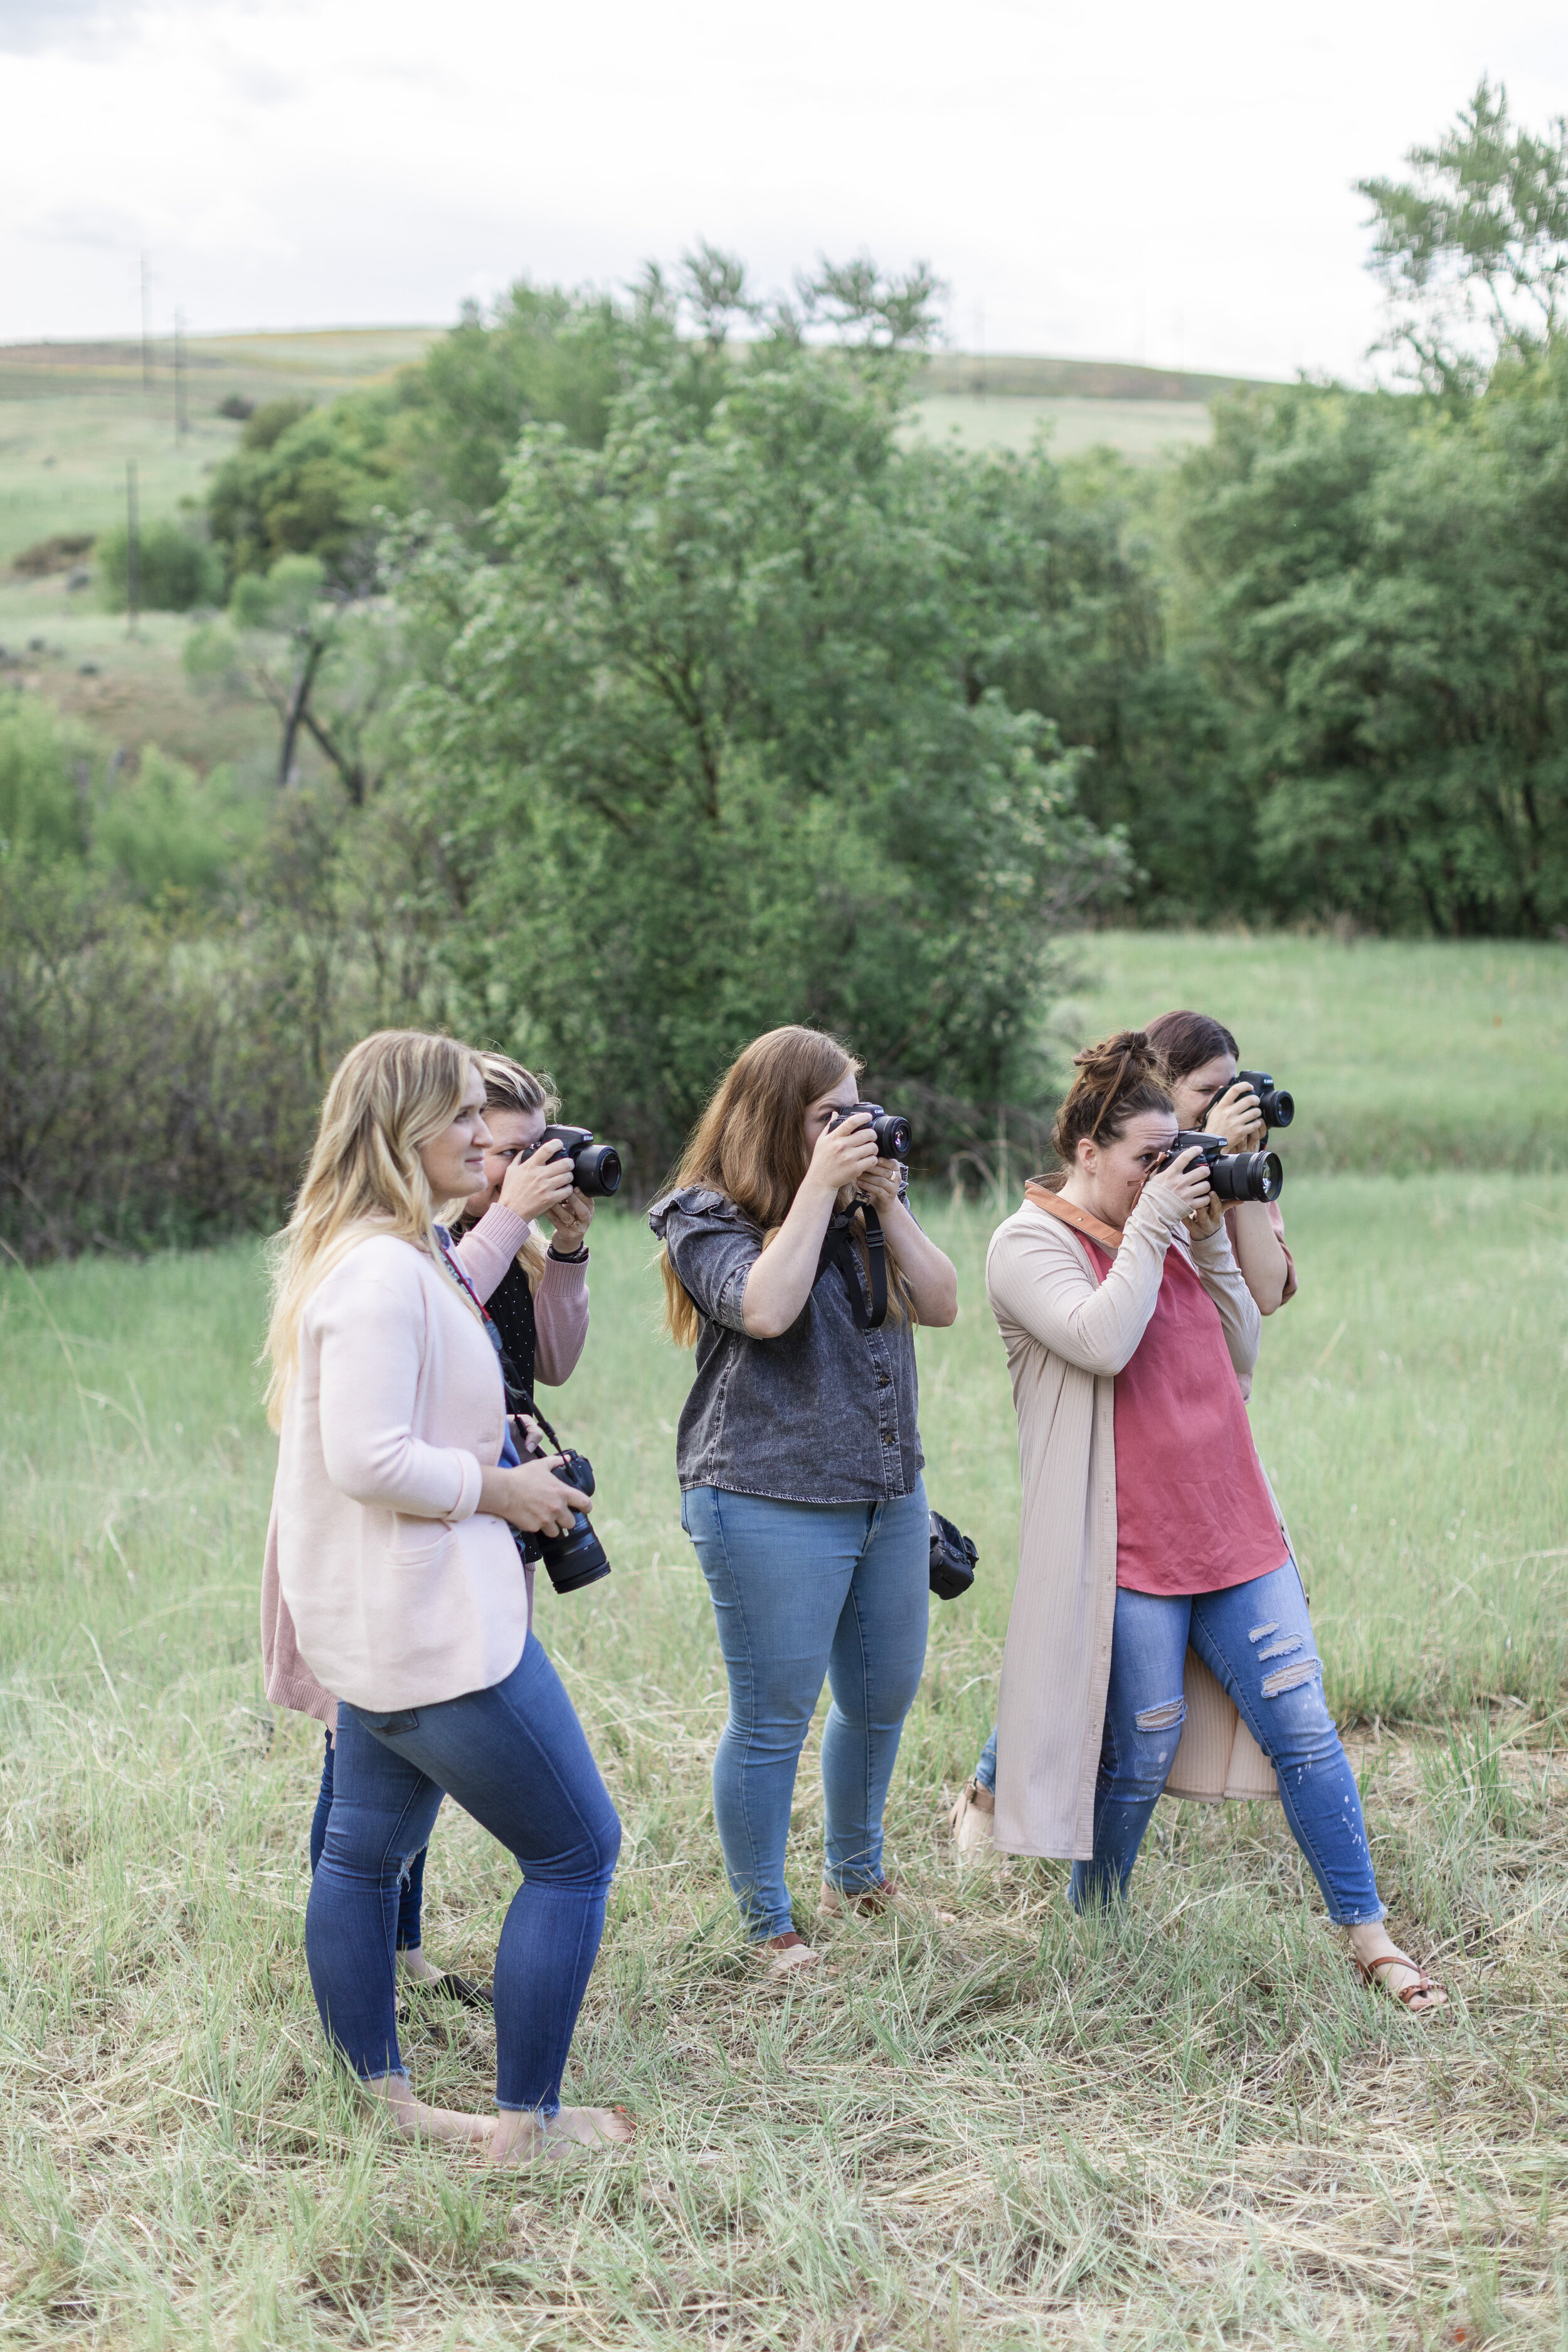  Clarity Lane Photography hosts a wedding day workshop in Logan Utah she captures photo of those in attendance. photographers at work learning lighting and placement photography #claritylanephotography #claritylaneweddings #claritylaneworkshop #weddi